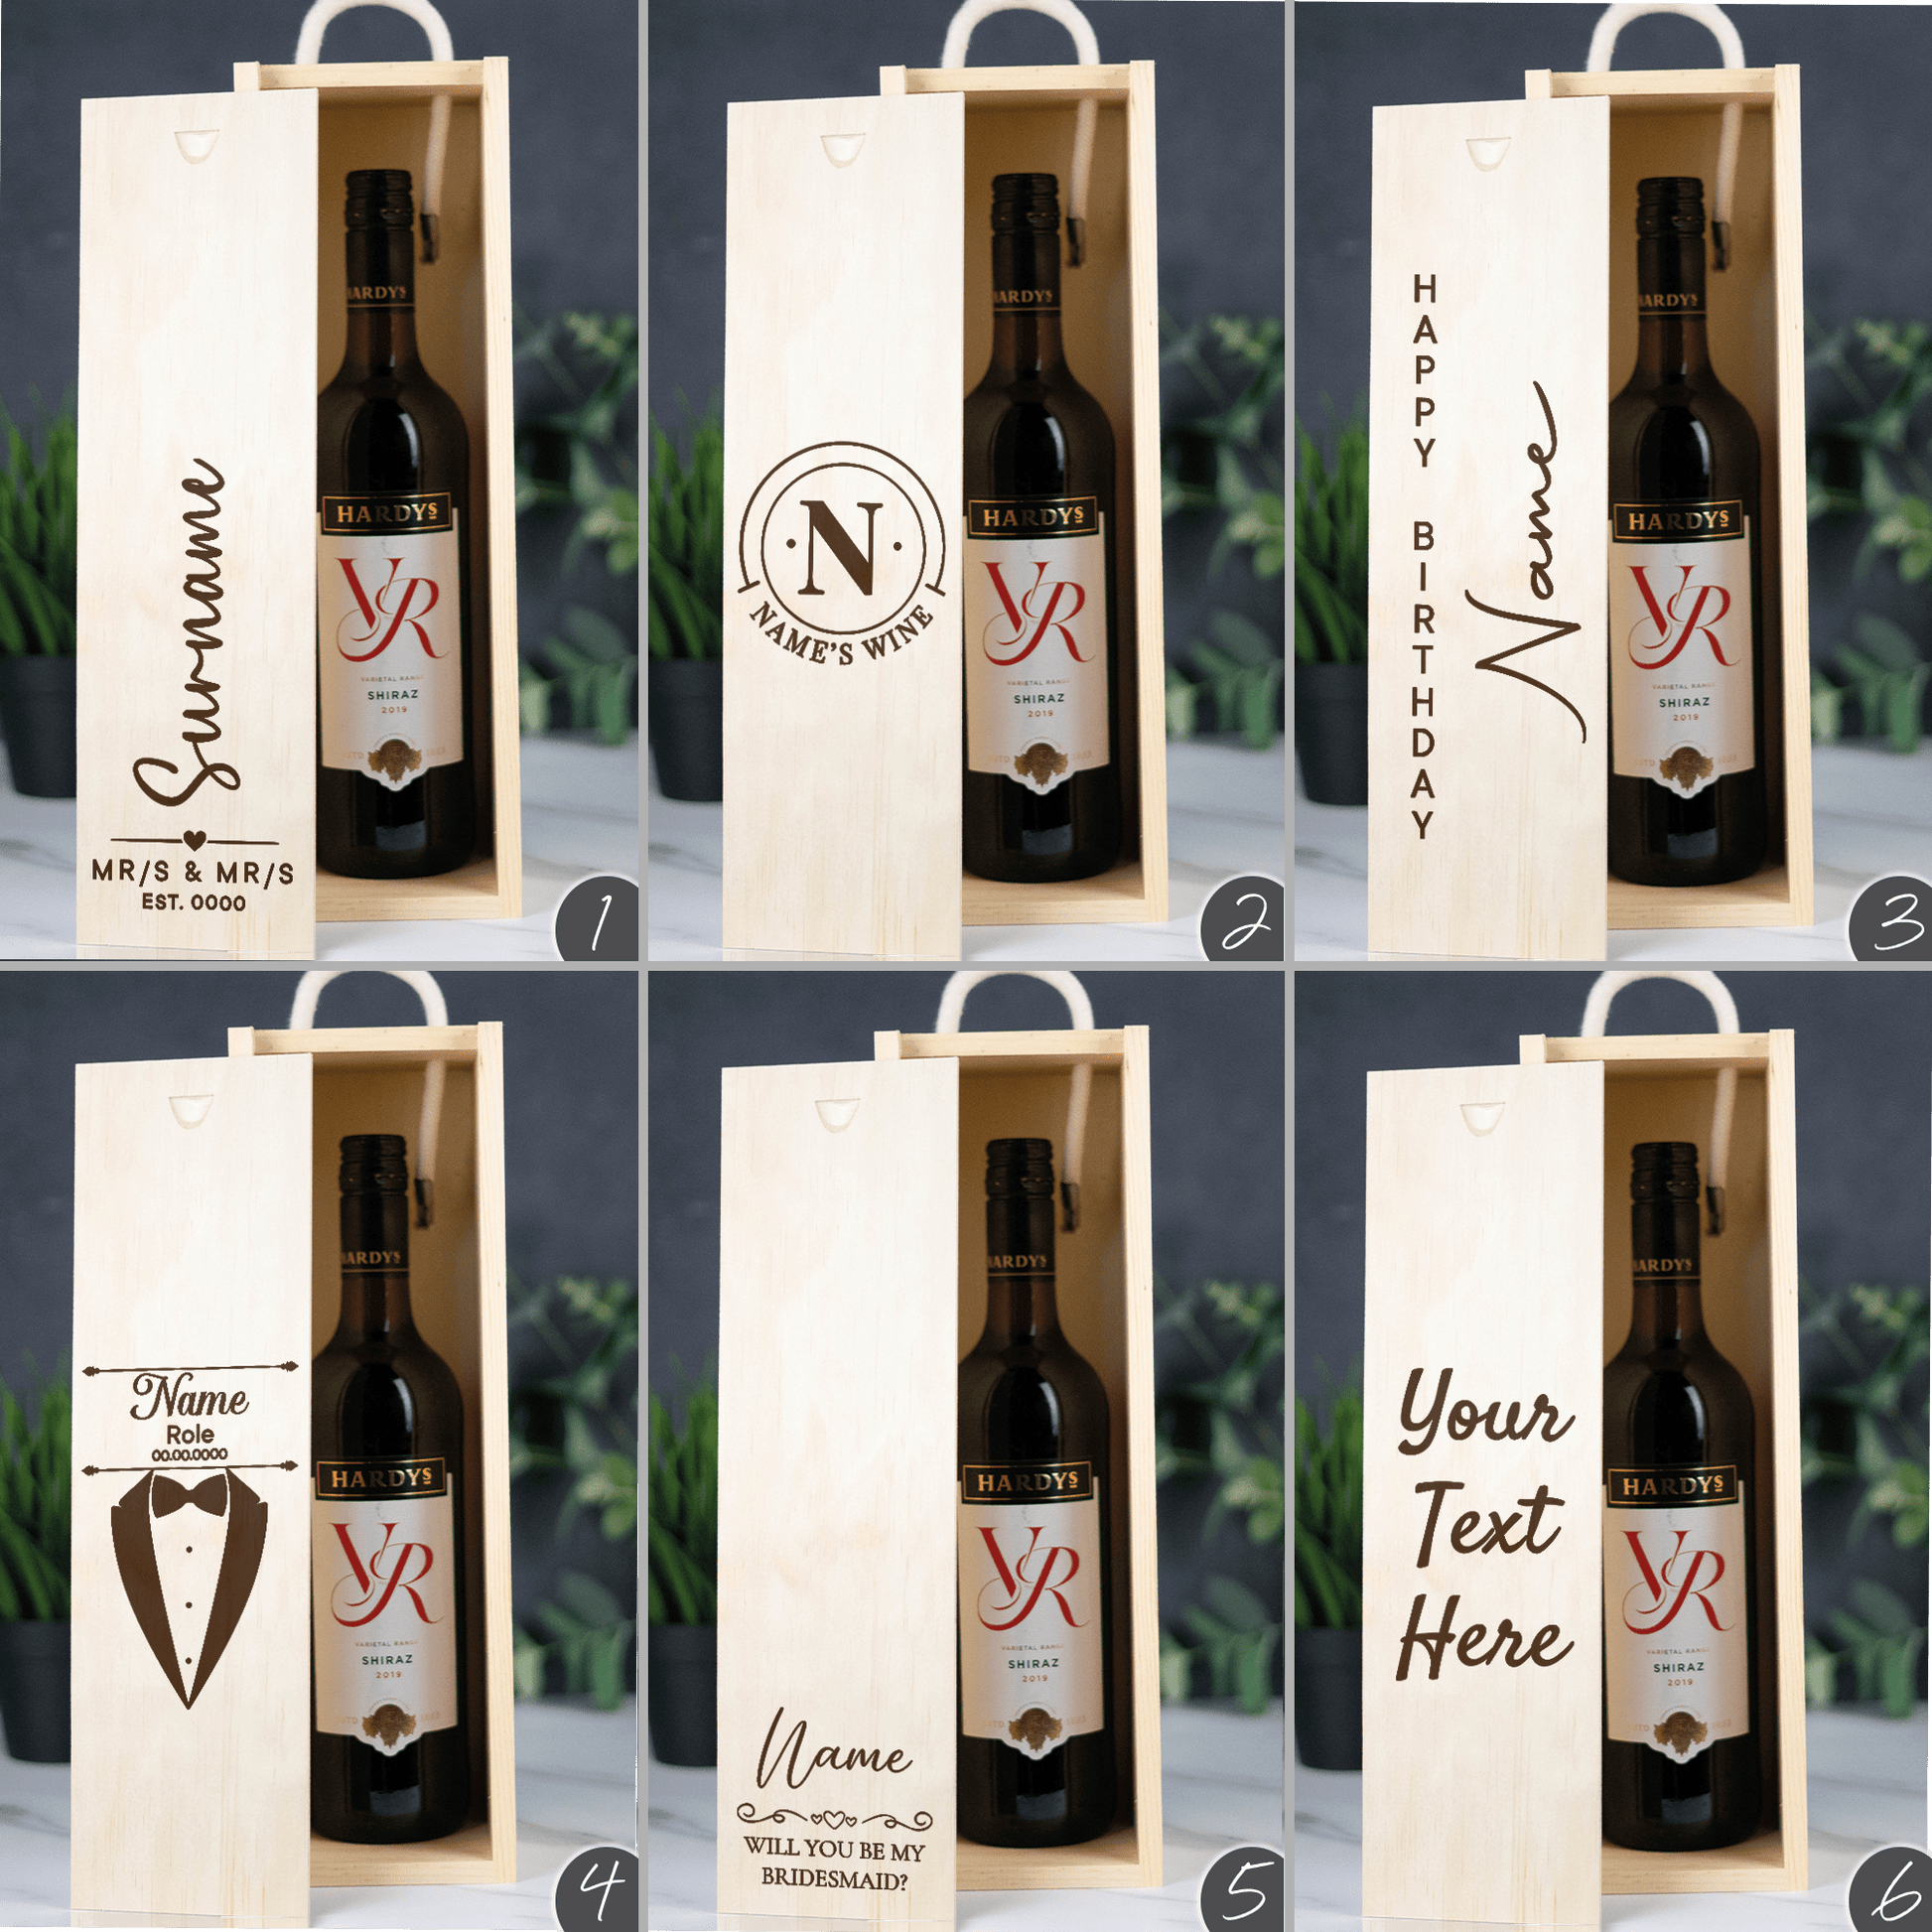 Personalised Wooden Wine Box - So Bespoke Gifts